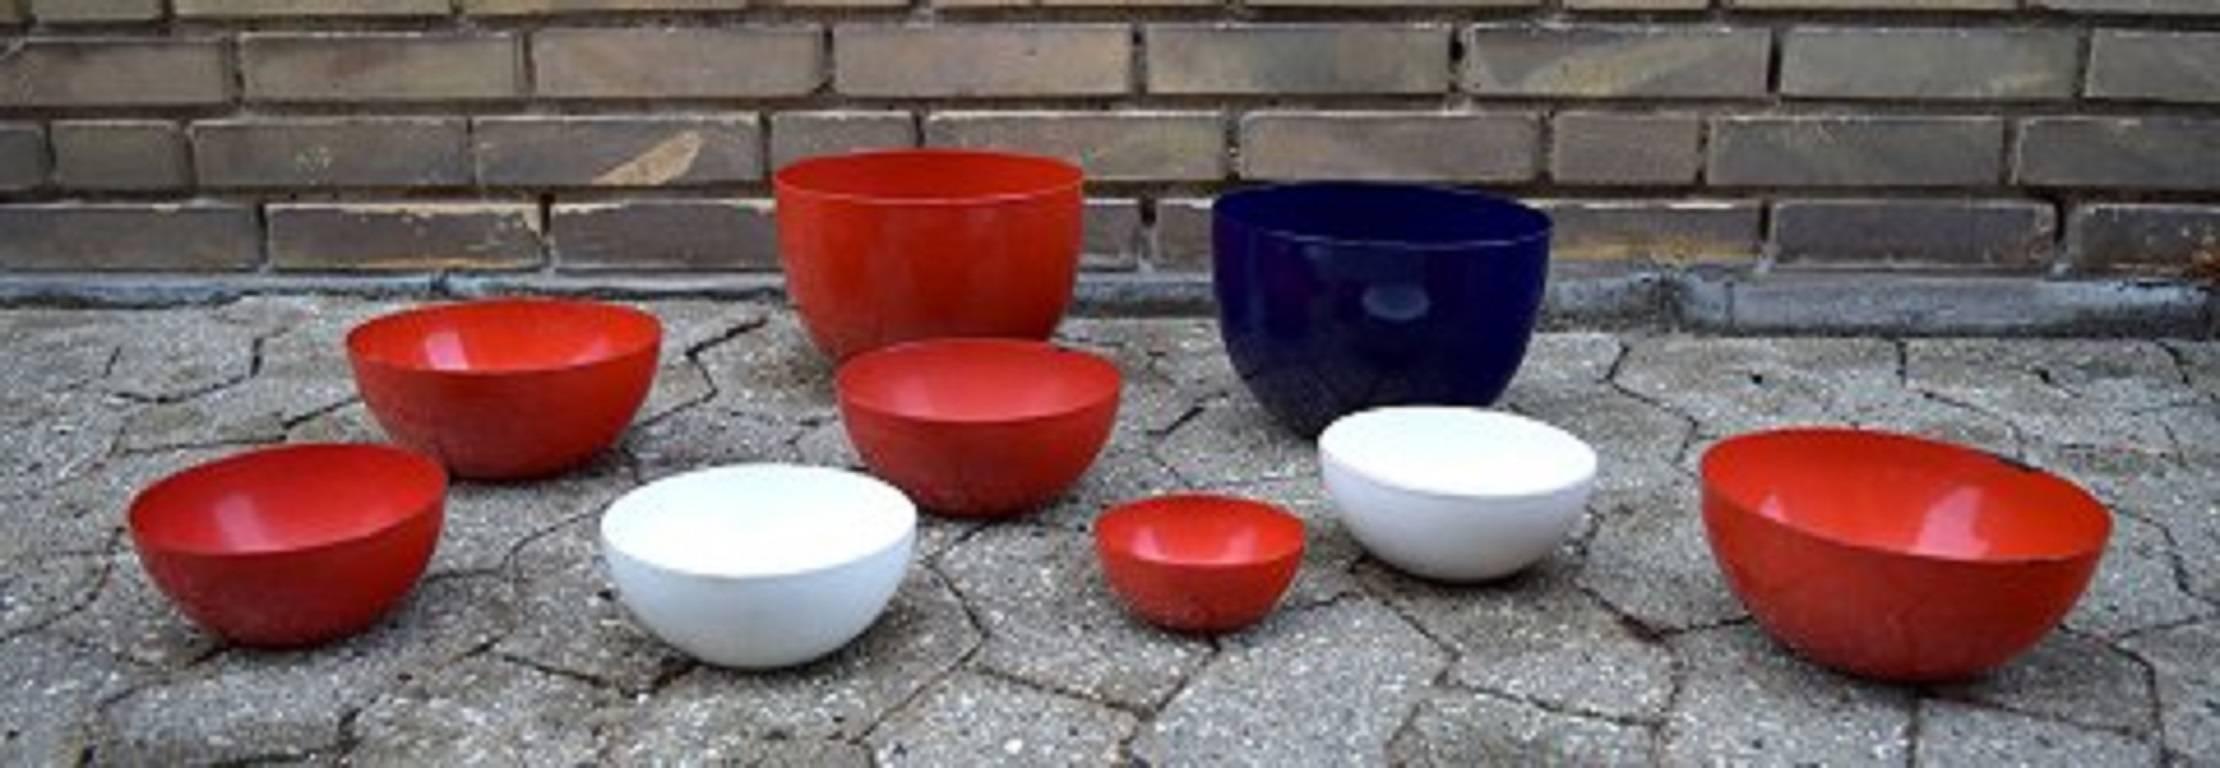 Kaj Franck, Finland.

Nine bowls, enamelled metal, Finel, Finland, 1950s.

Red, blue and white.

Measures: Diameter 10-24 cm, height 5-14 cm.

In good condition, minor wear.

Marked.